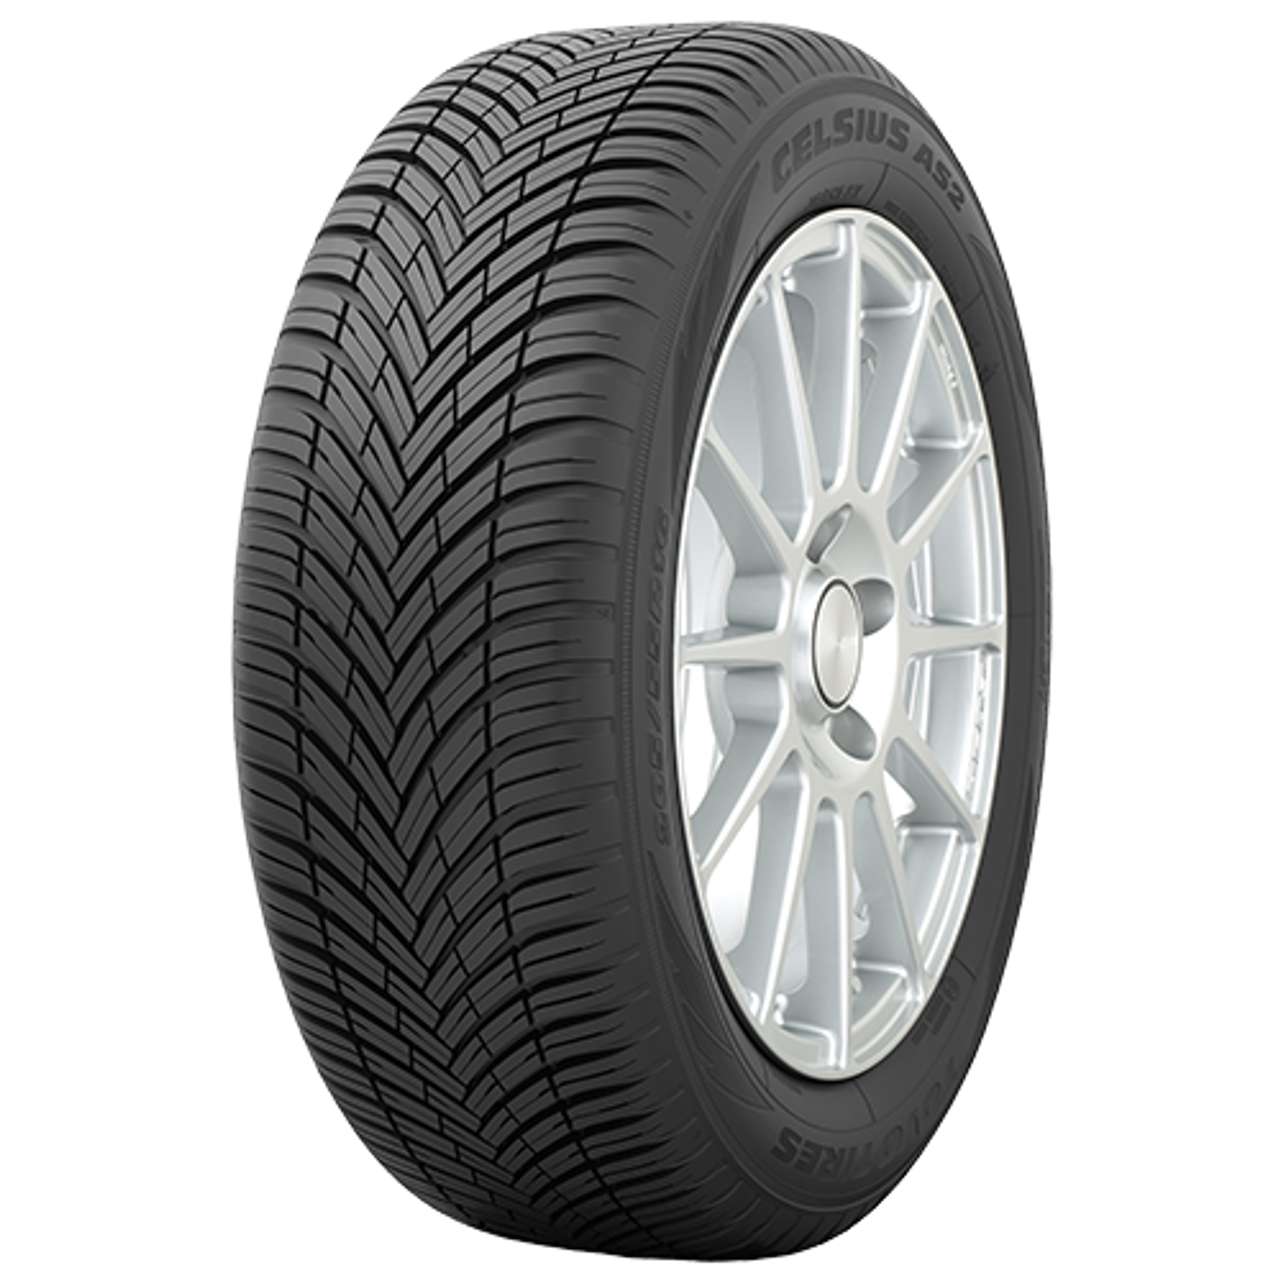 TOYO CELSIUS AS2 215/55R17 98W BSW